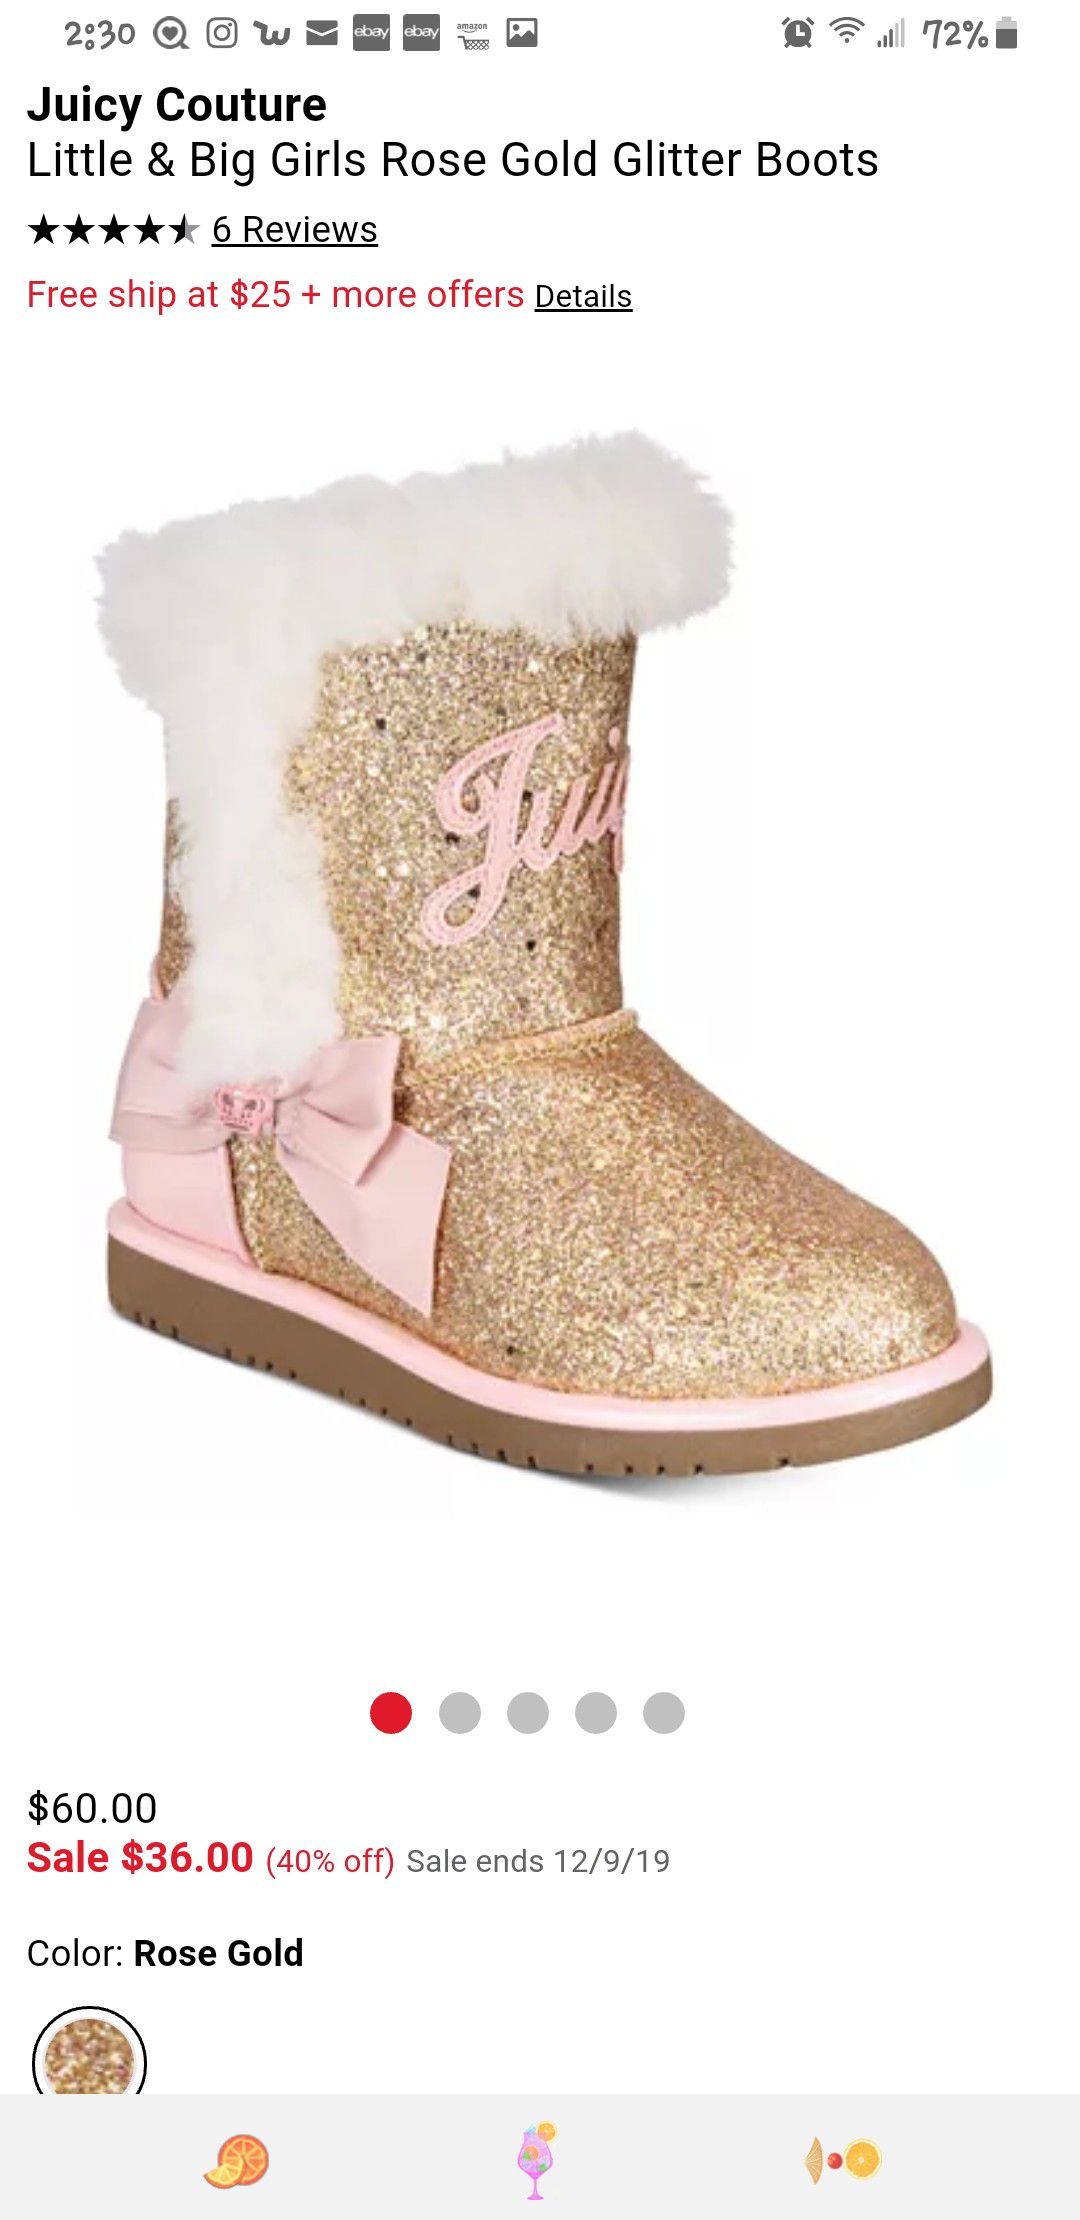 Warm Juicy Couture Little & Big Girls Rose Gold Glitter Boots toddler girl size 8